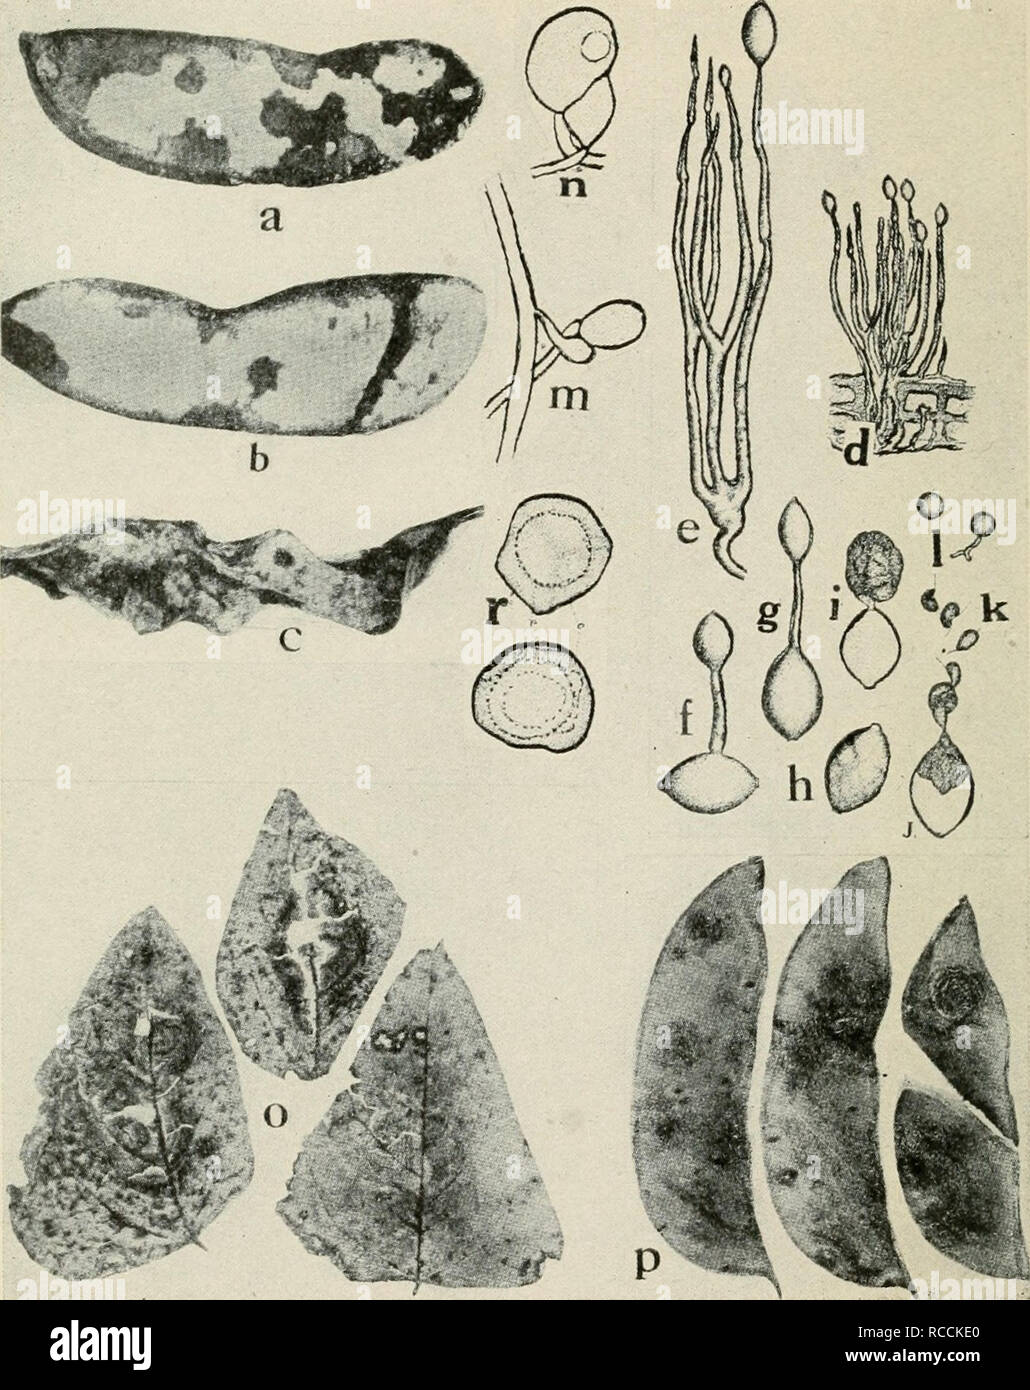 . Diseases of truck crops and their control. Vegetables. Fig. 48. Diseases of Lima Bean. a. h. c. different stages of downy mildew on pods, d. tuft of conidiophores and conidia of Phythophthora phaseoli, e. same as d. but greatly enlarged, /. g. conidia germinating by means of a germ tube, h. i. j. k. germination of conidia by means of zoospores, /. germinating zoospores {d. to /. after Thaxter), m. n. fertilization of the oogonium by the antheridium, o. Phoma blight on foliage, p. Phoma blight on pods (o. and p. after Halsted), r. mature oospores of P. phaseoli {a. to c, m. n. and r. after Cl Stock Photo